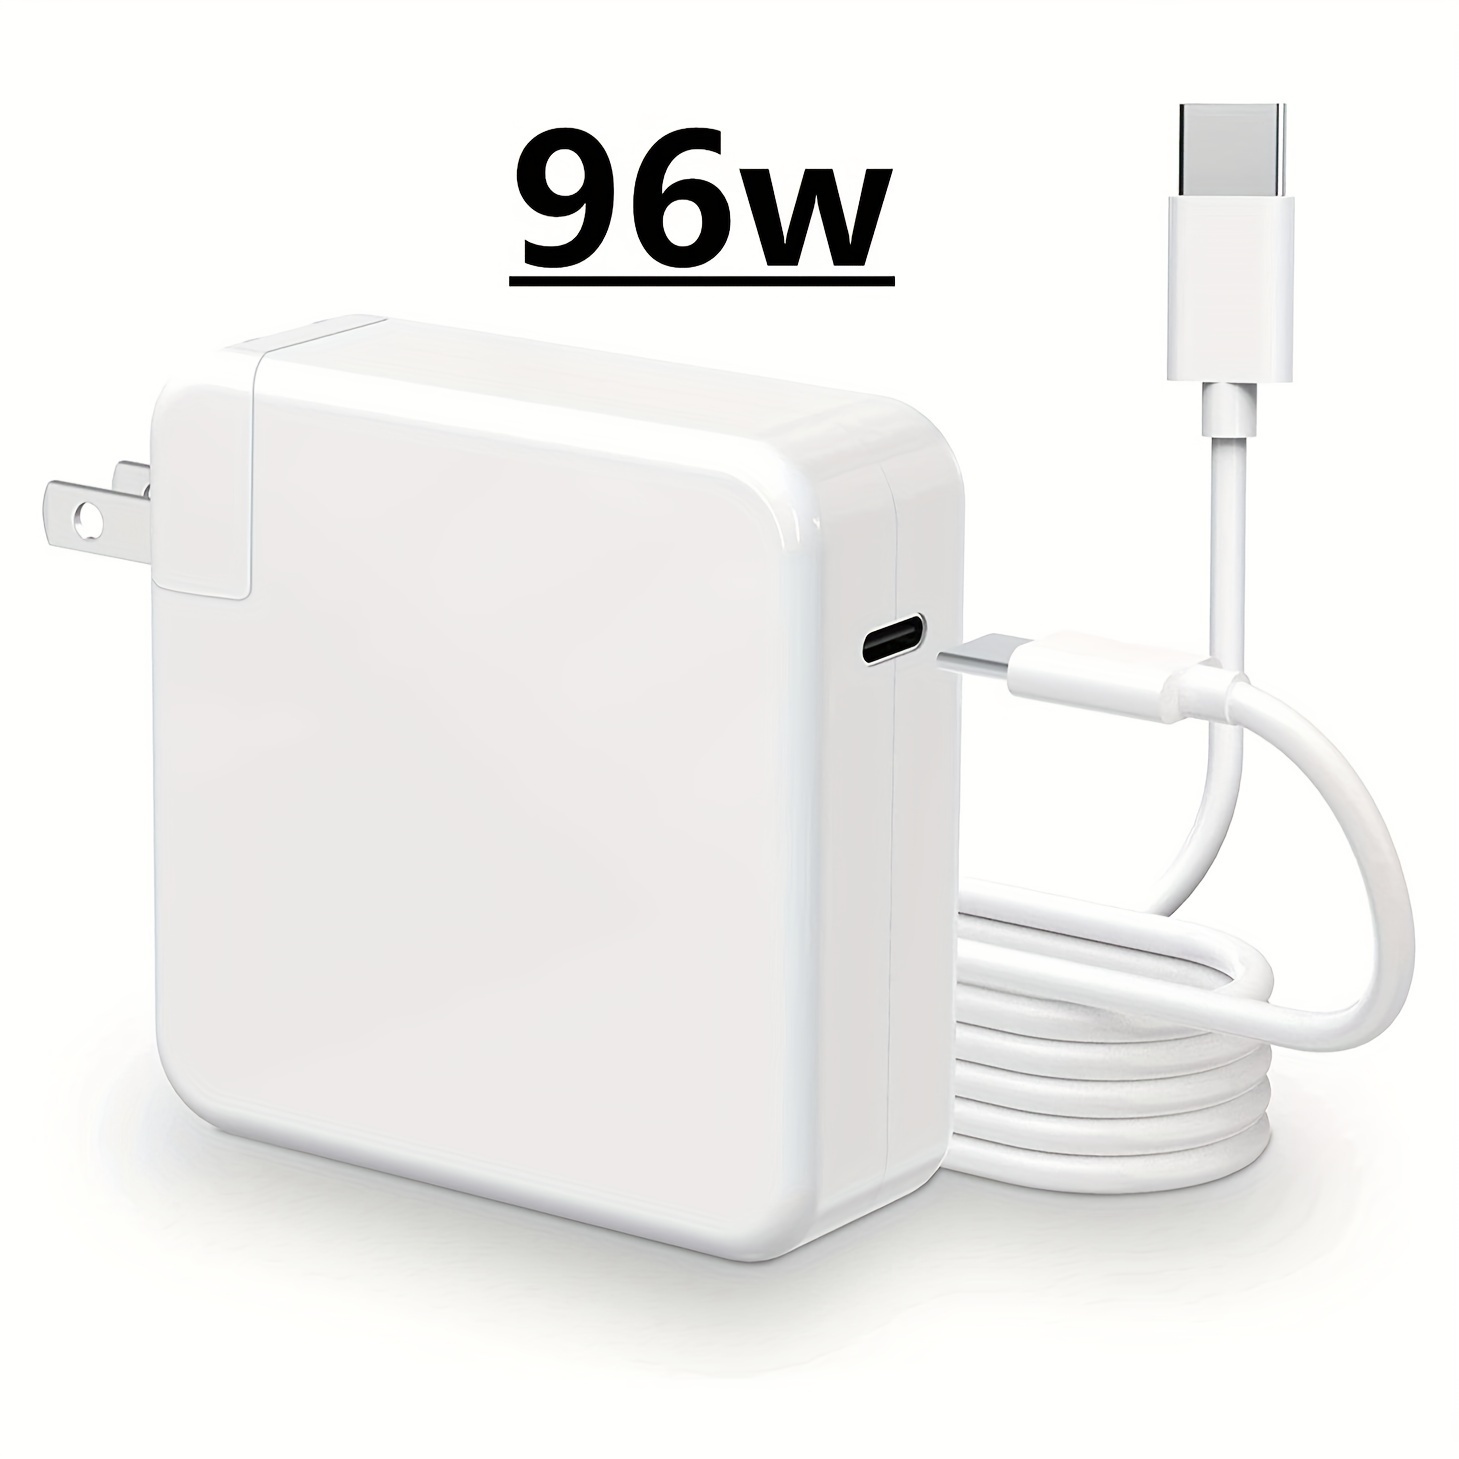 MacBook Air Charger 30W USB C Mini GaN Charger Compatible with M1/M2 Chip  Laptops MacBook Air Retina 13-inth & MacBook Retina 12-Inch Laptops,iPhone